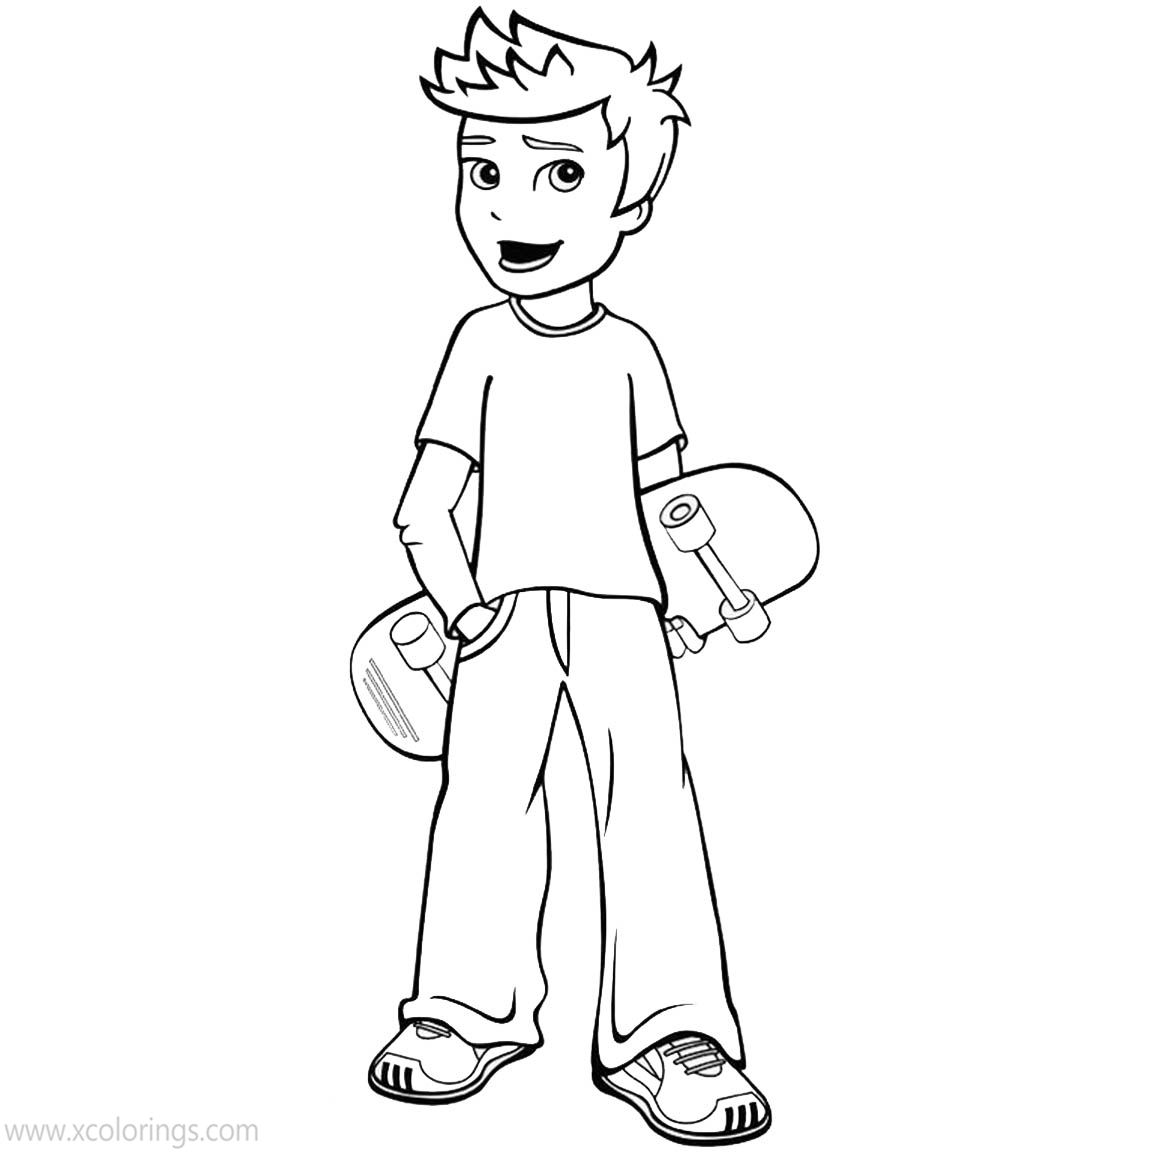 Free Polly Pocket Coloring Pages Rick with Skateboard printable